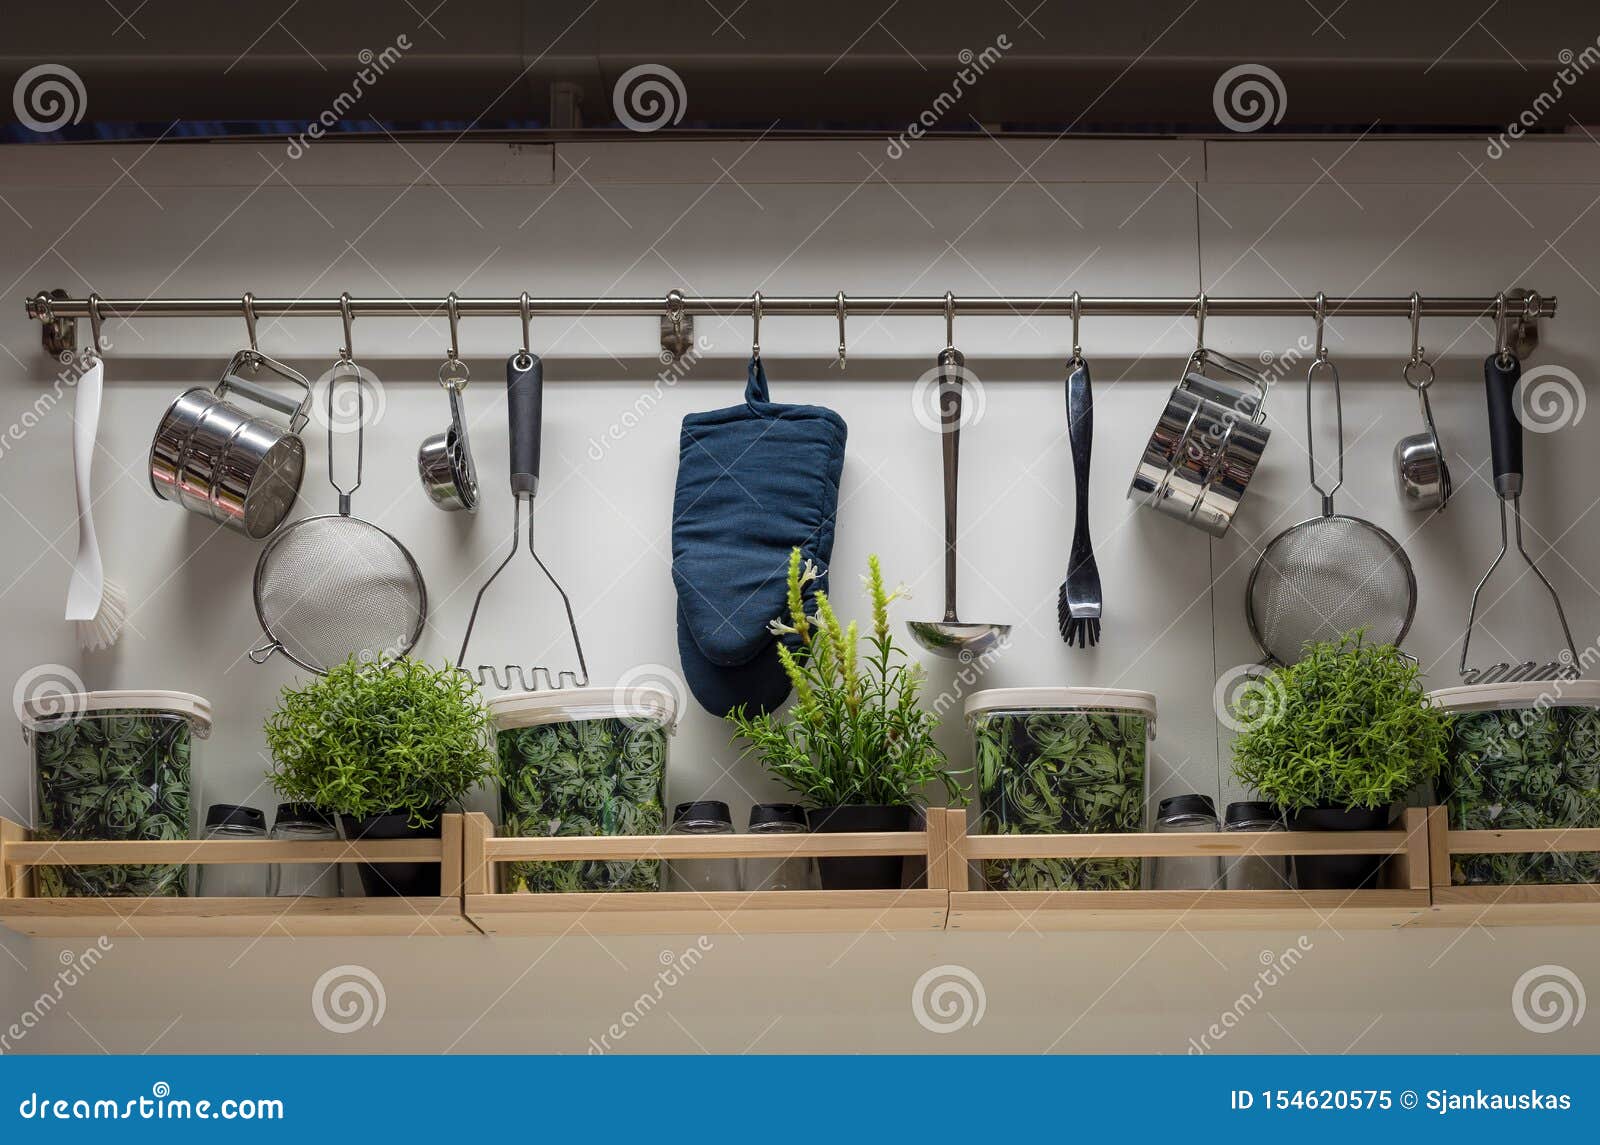 kitchen area tools on the wall surface, interior decoration supply picture